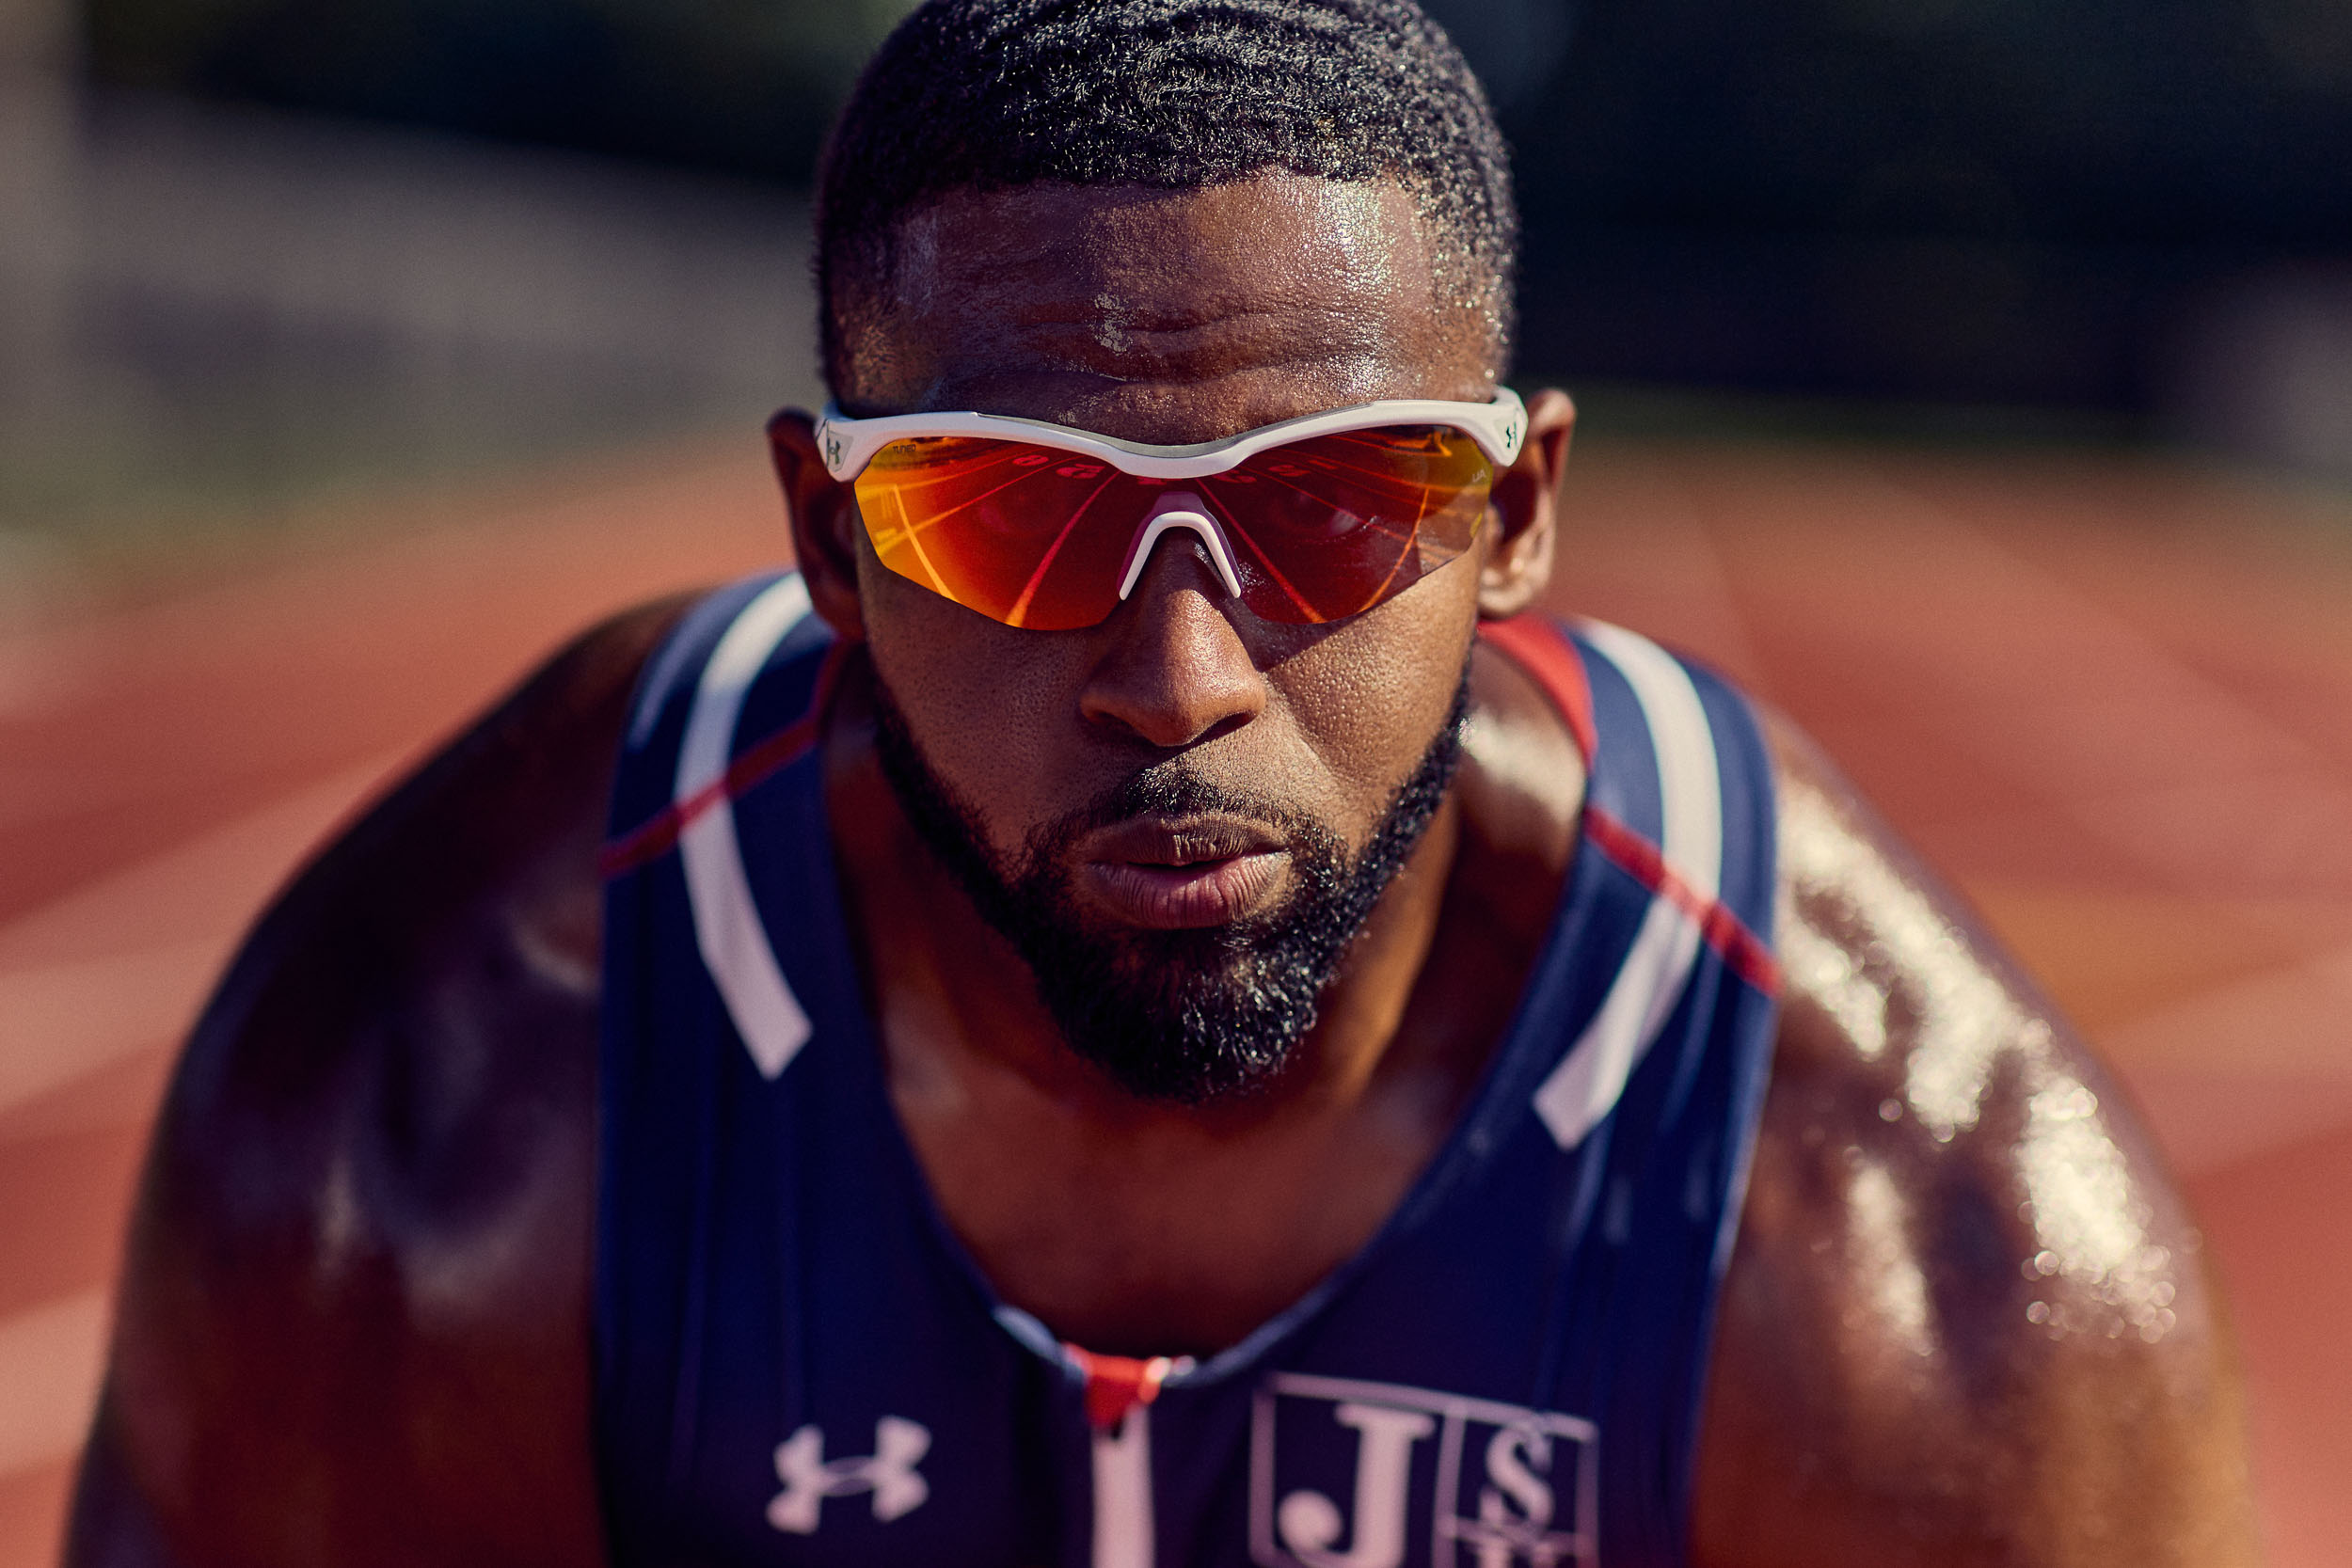 COMMERCIAL SPORTS ADVERTISING PHOTOGRAPHER CREATING ATHLETE PORTRAIT PHOTOGRAPHY